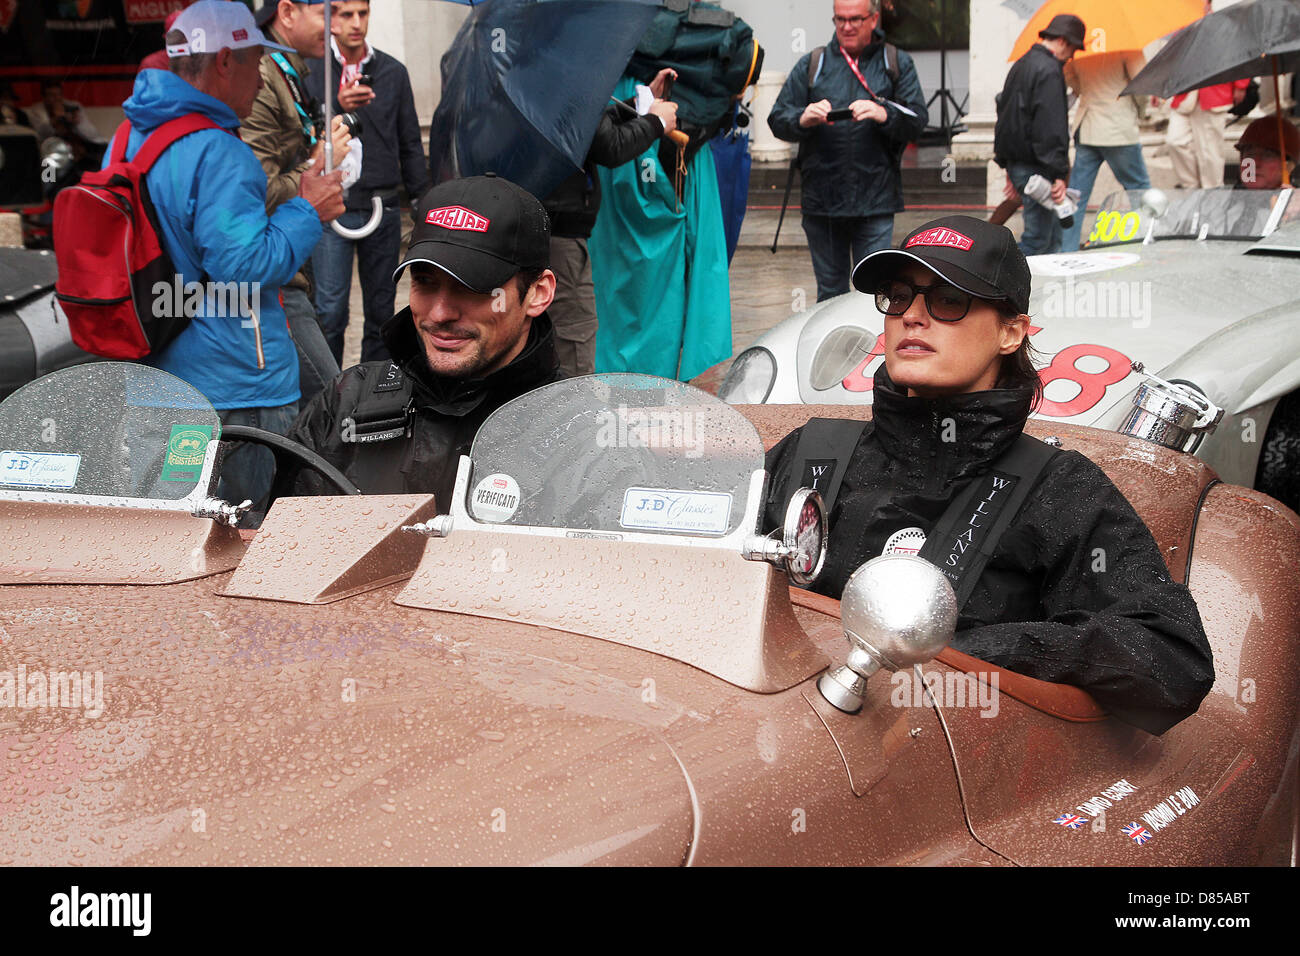 Supermodel David Gandy with Yasmin Le Bon taking part in a very wet 2013 Mille Miglia road race driving a 1950 Jaguar XK120 Stock Photo